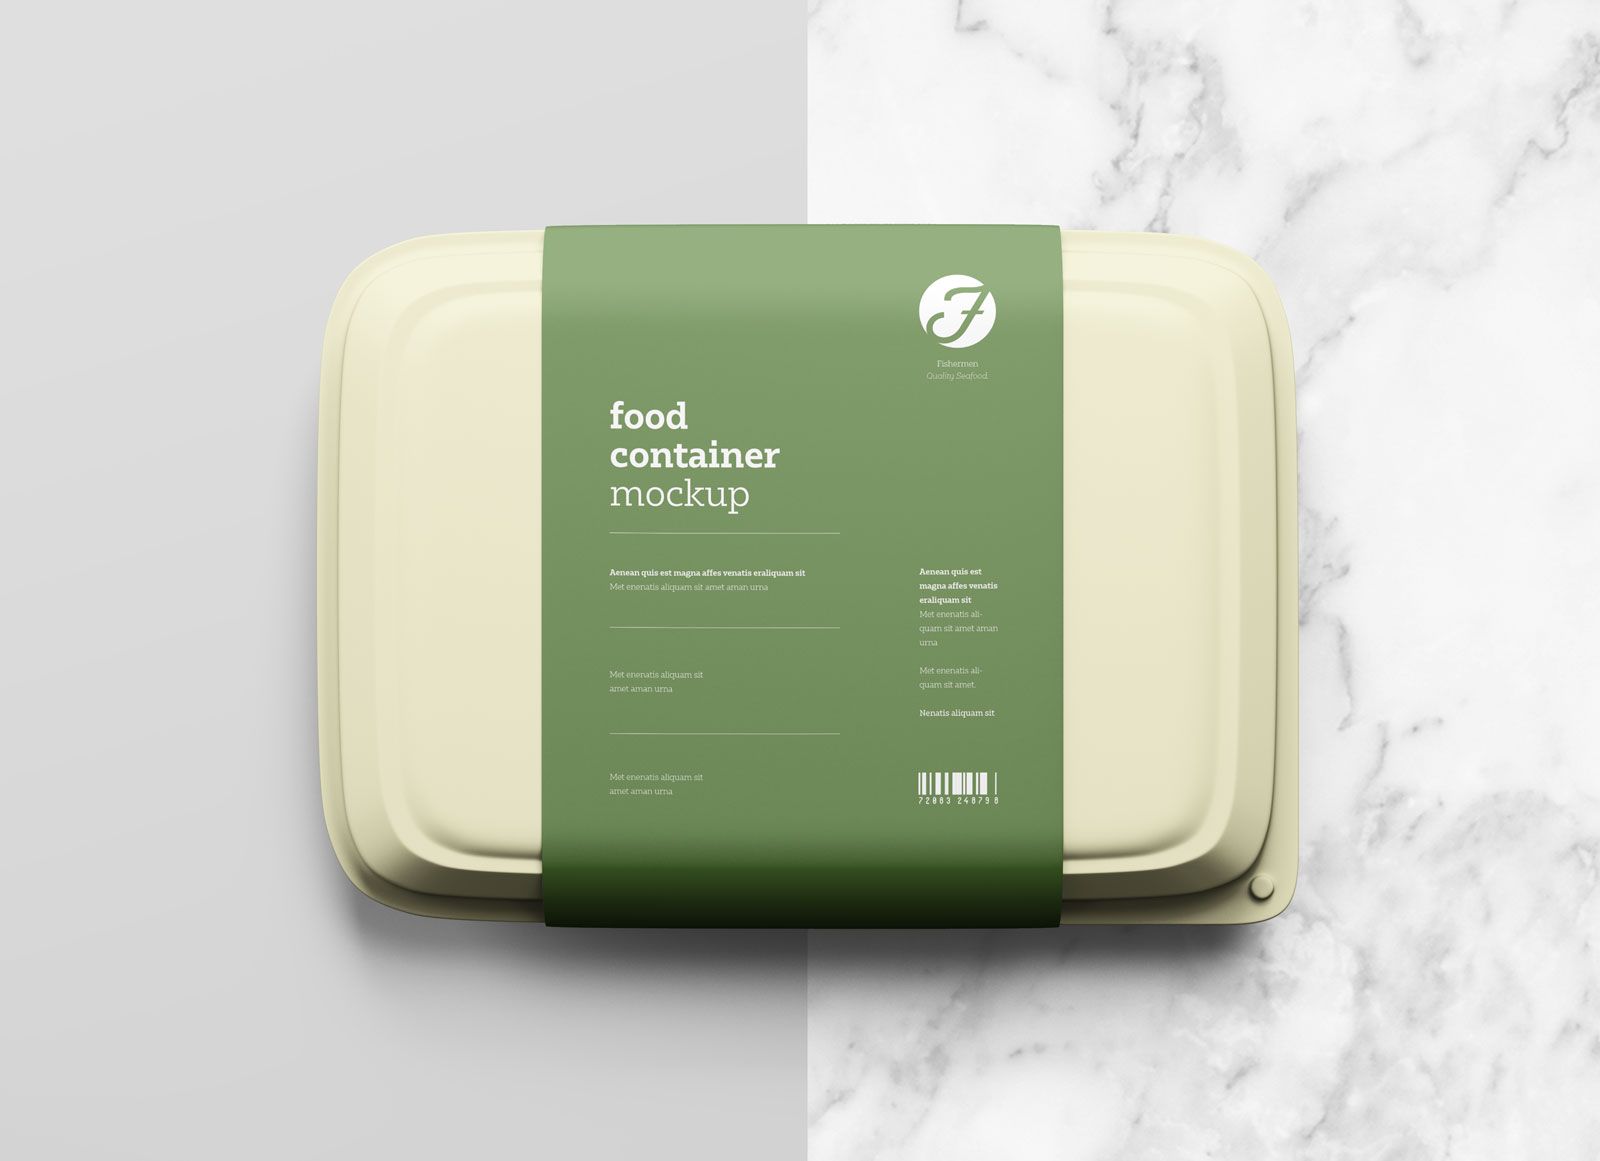 Another quality mock from graphicpear, a free plastic food box